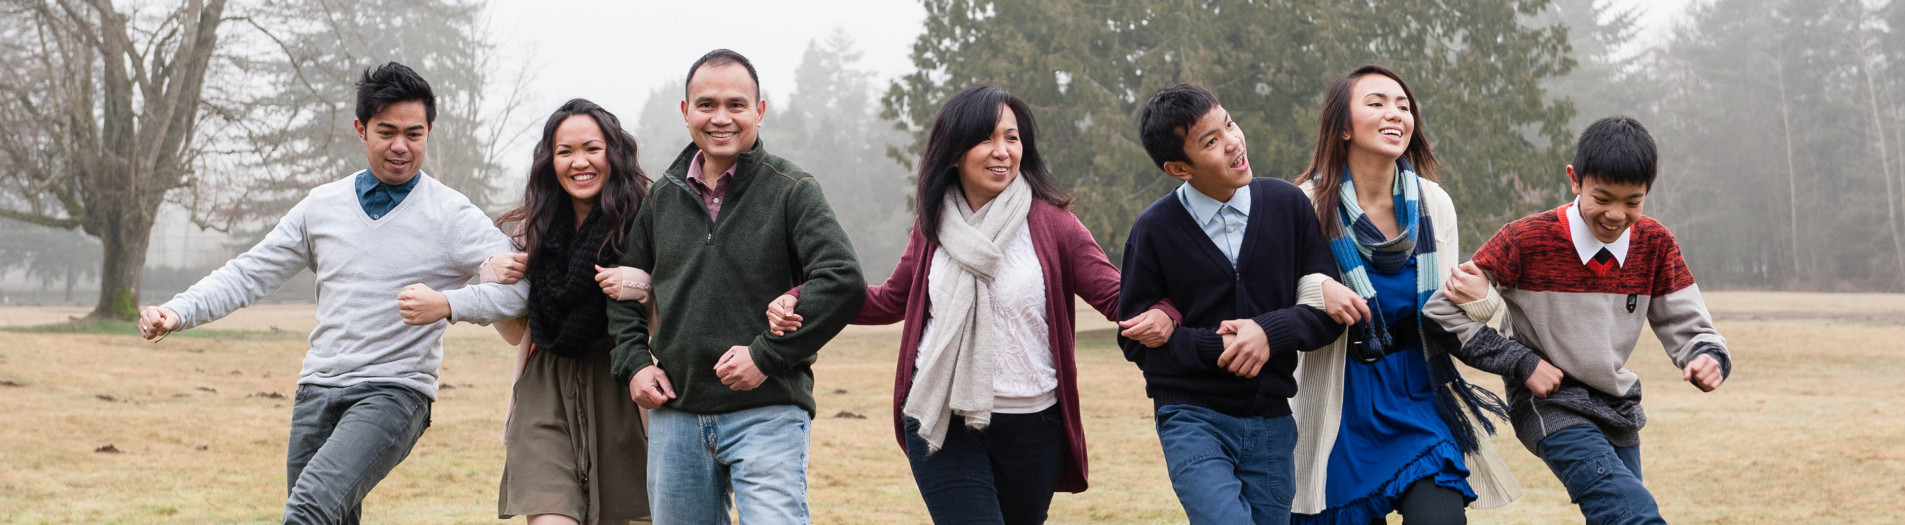 Fun family photos in the fog [Preview] | Vancouver Portrait Photography